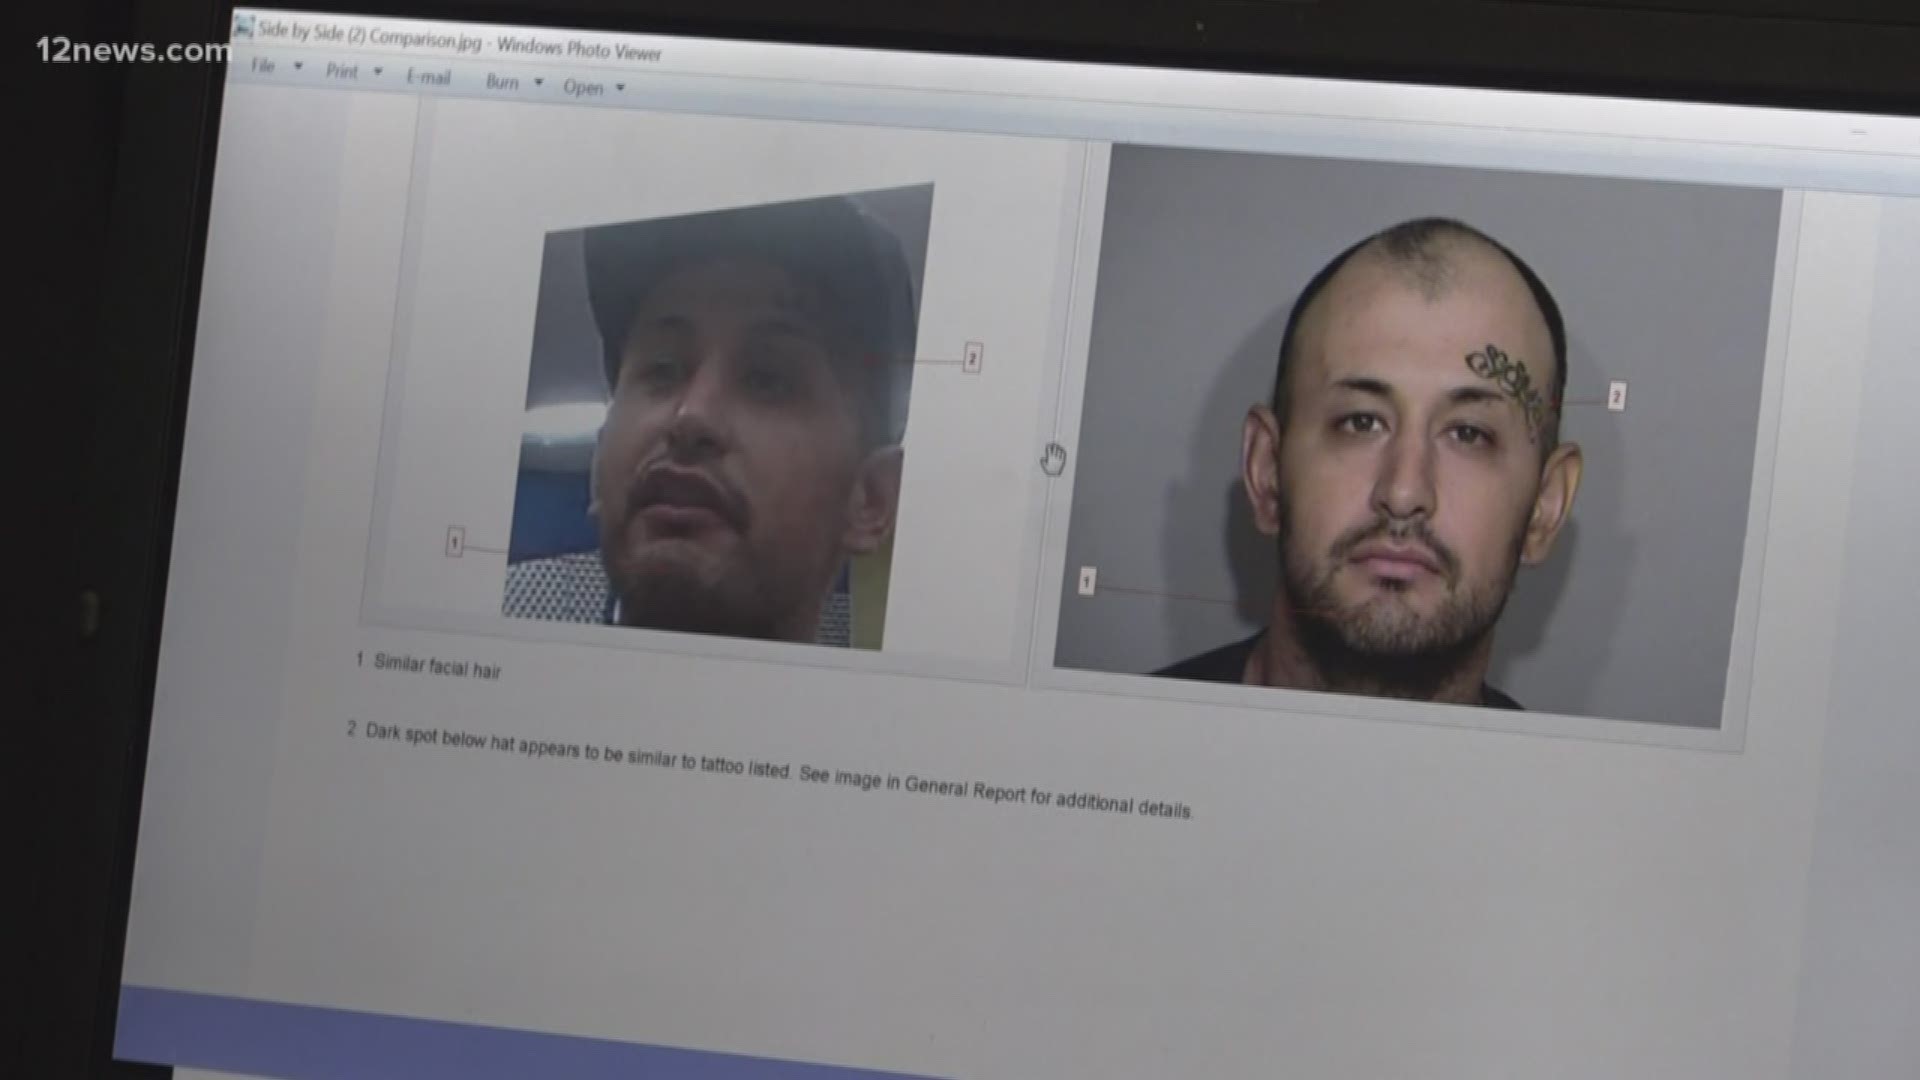 The technology was able to help in catching a man who was accused of robbing a gas station with a knife. Facial recognition is helping catch criminals now.